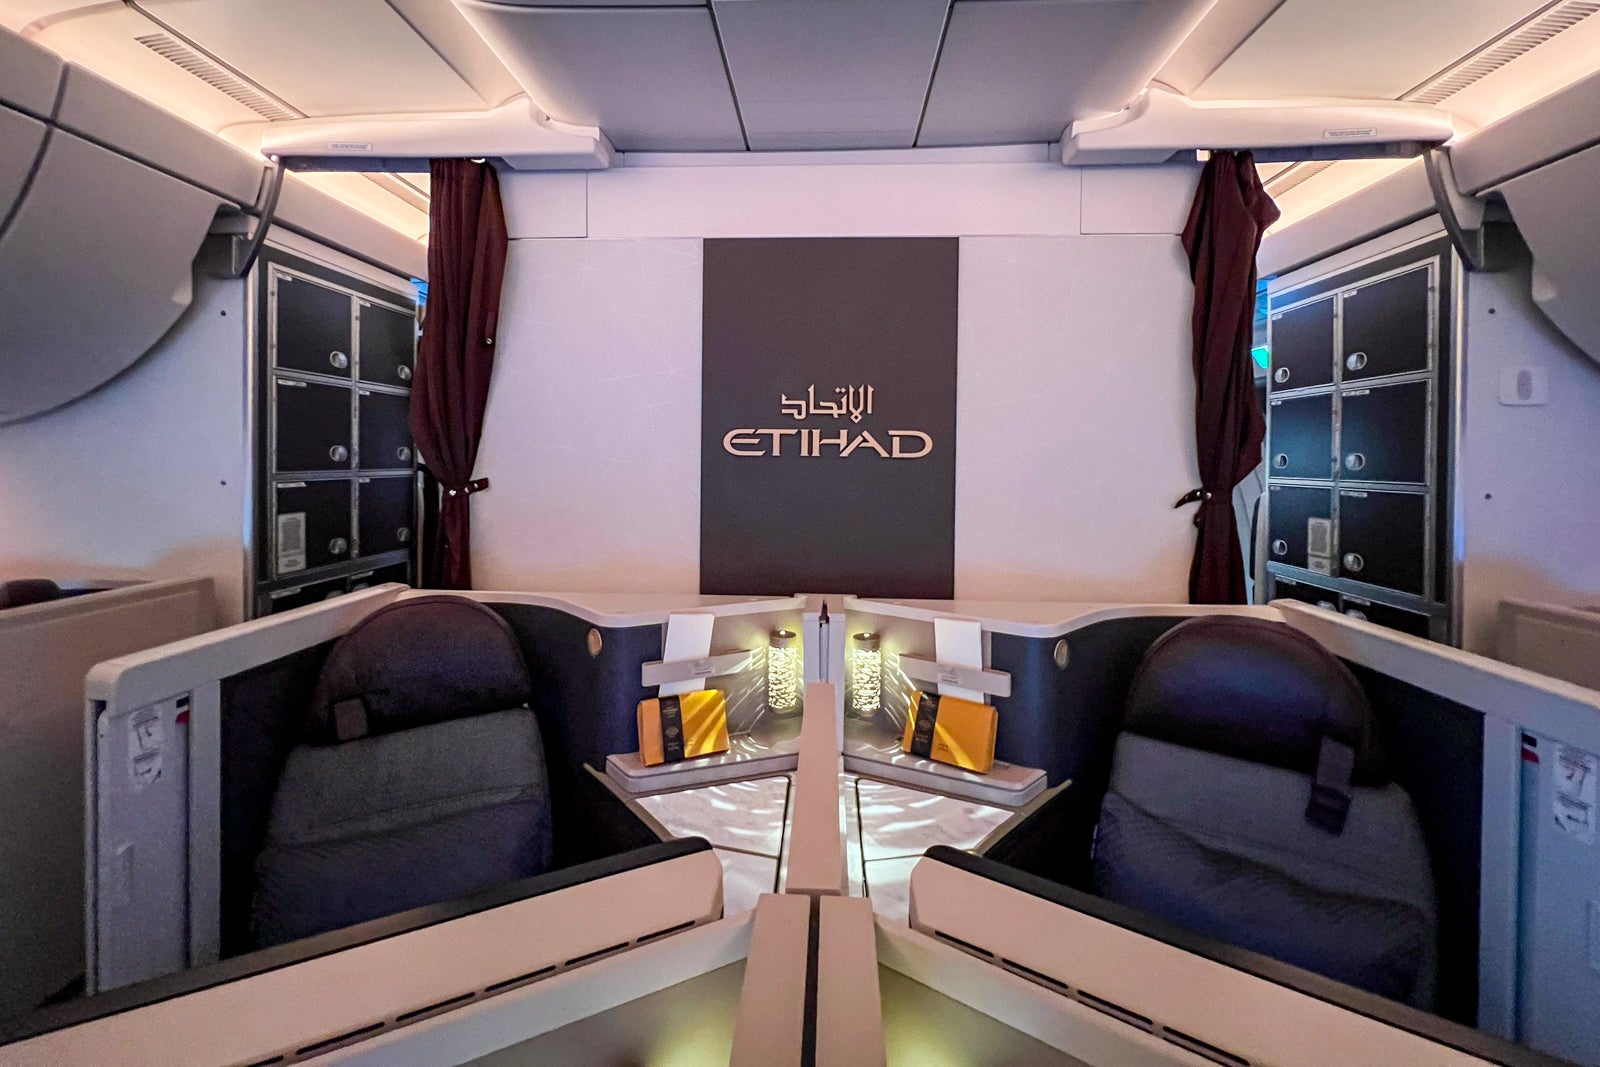 Etihad enterprise class overview aboard the Airbus A350